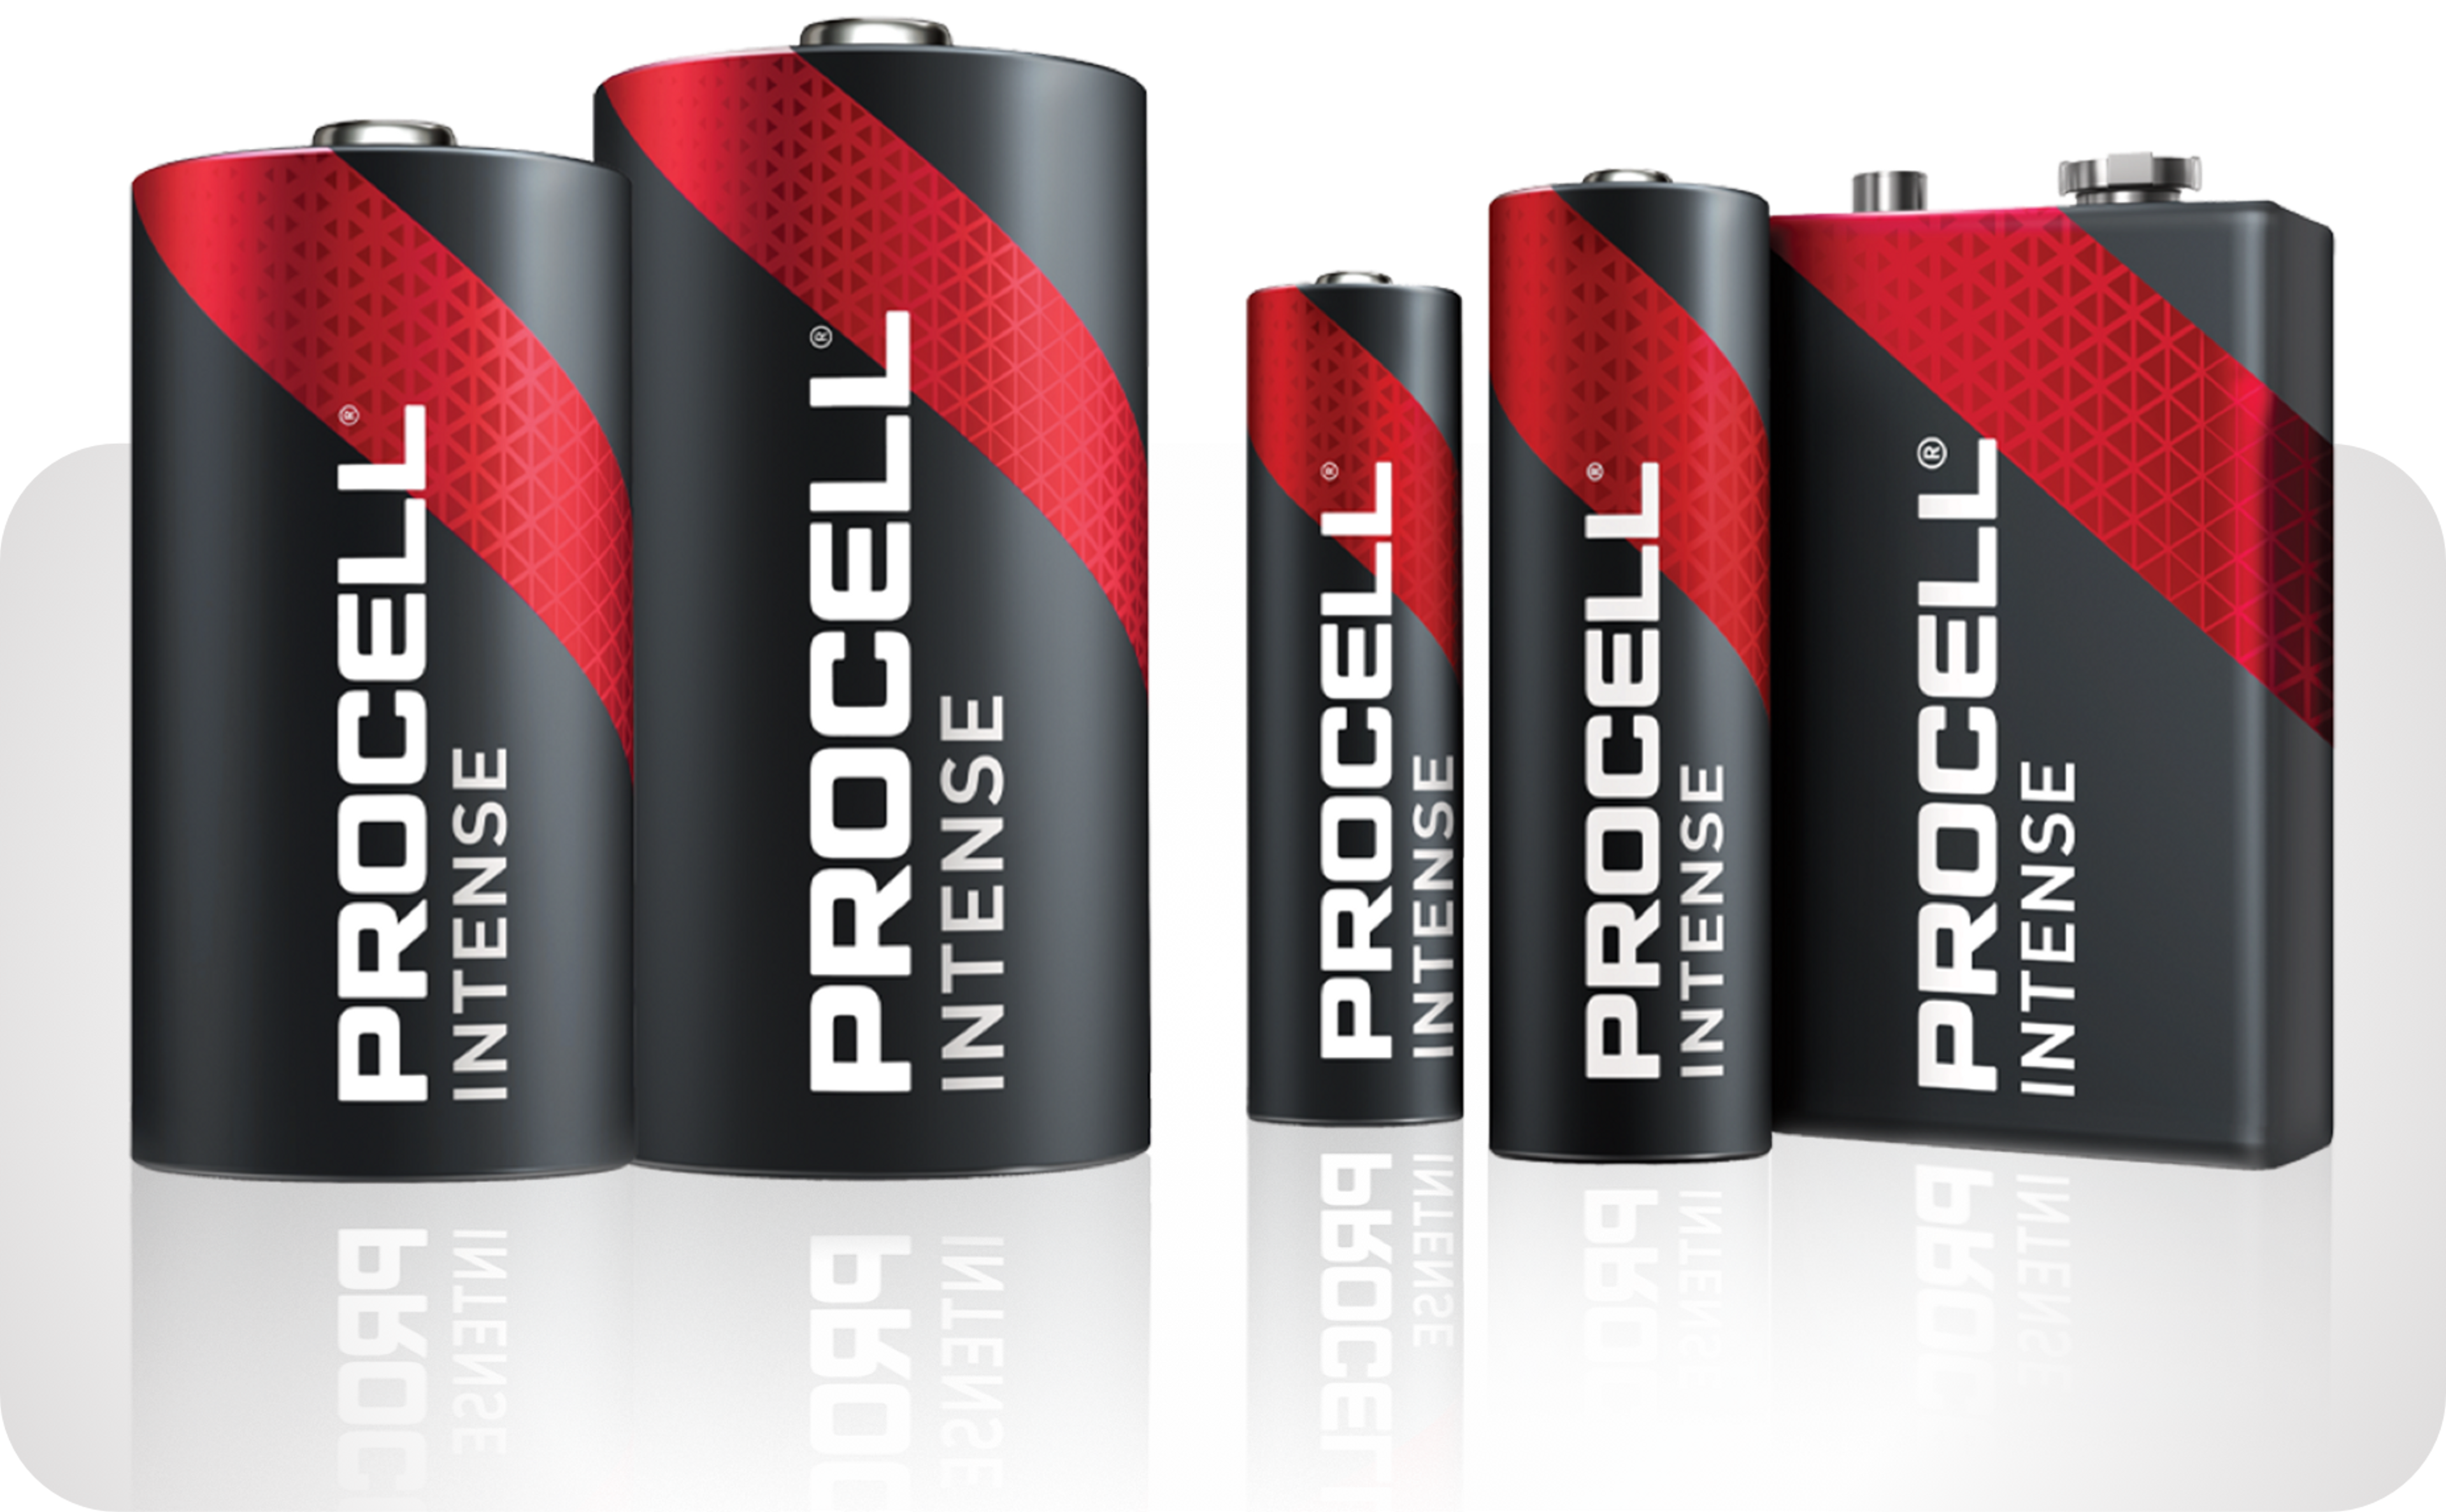 Picture showing various Procell Plus batteries  in popular sizes: AA, AAA, C, D and 9-volt